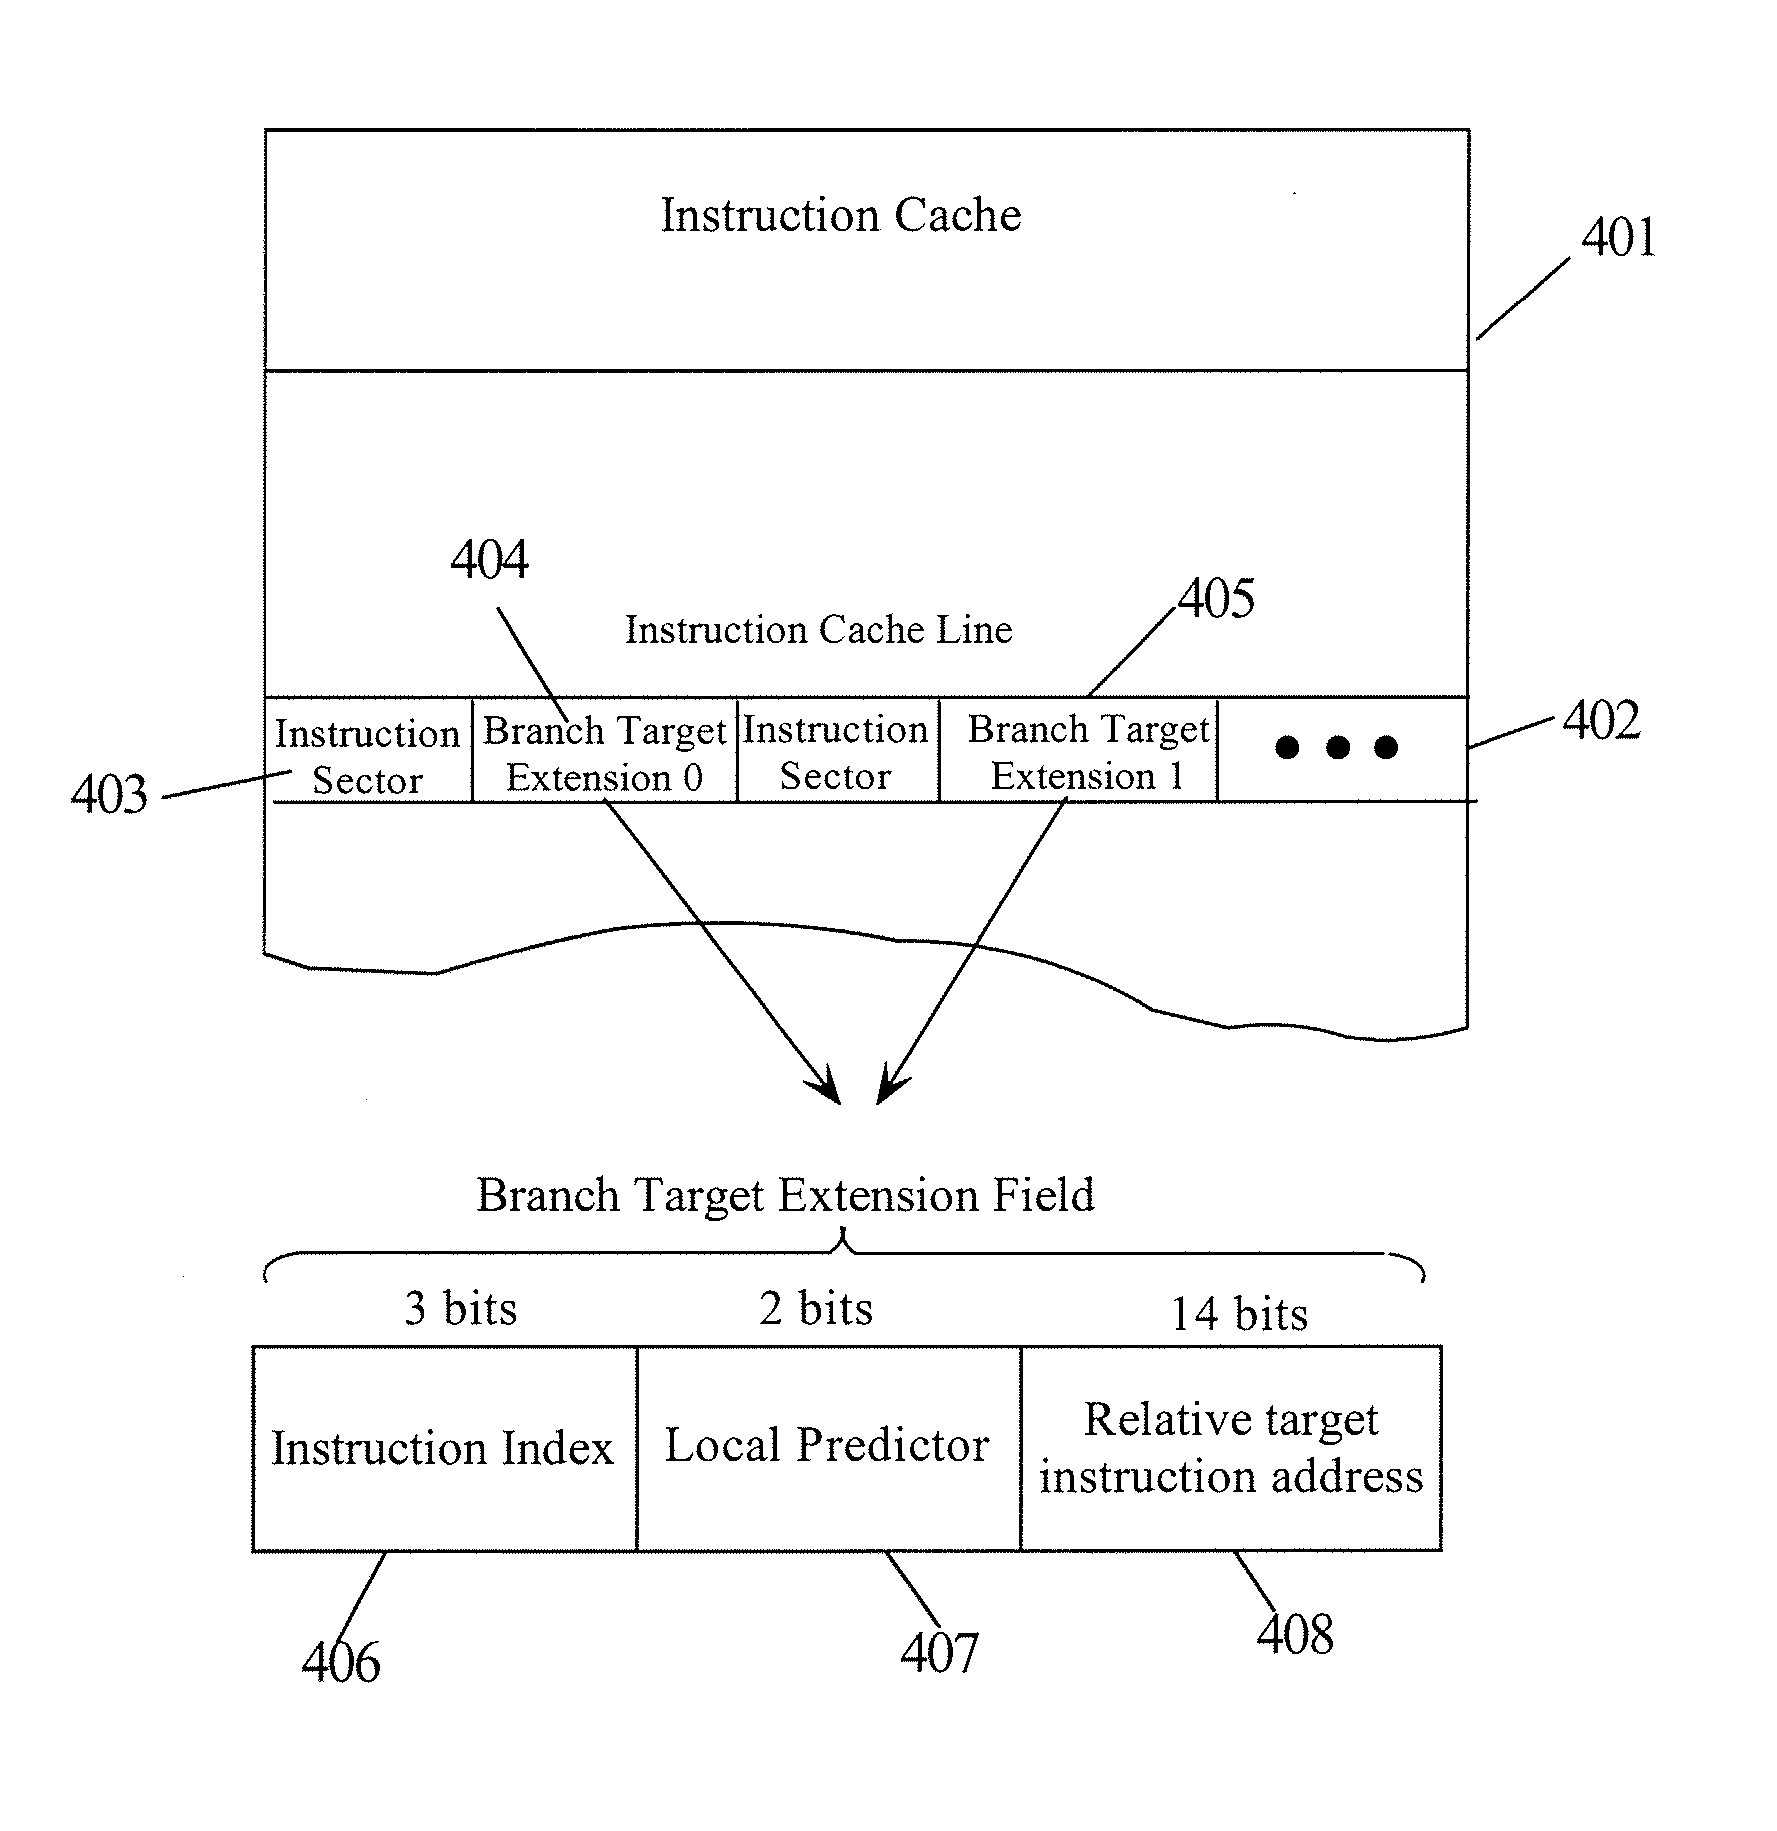 Branch Target Extension for an Instruction Cache